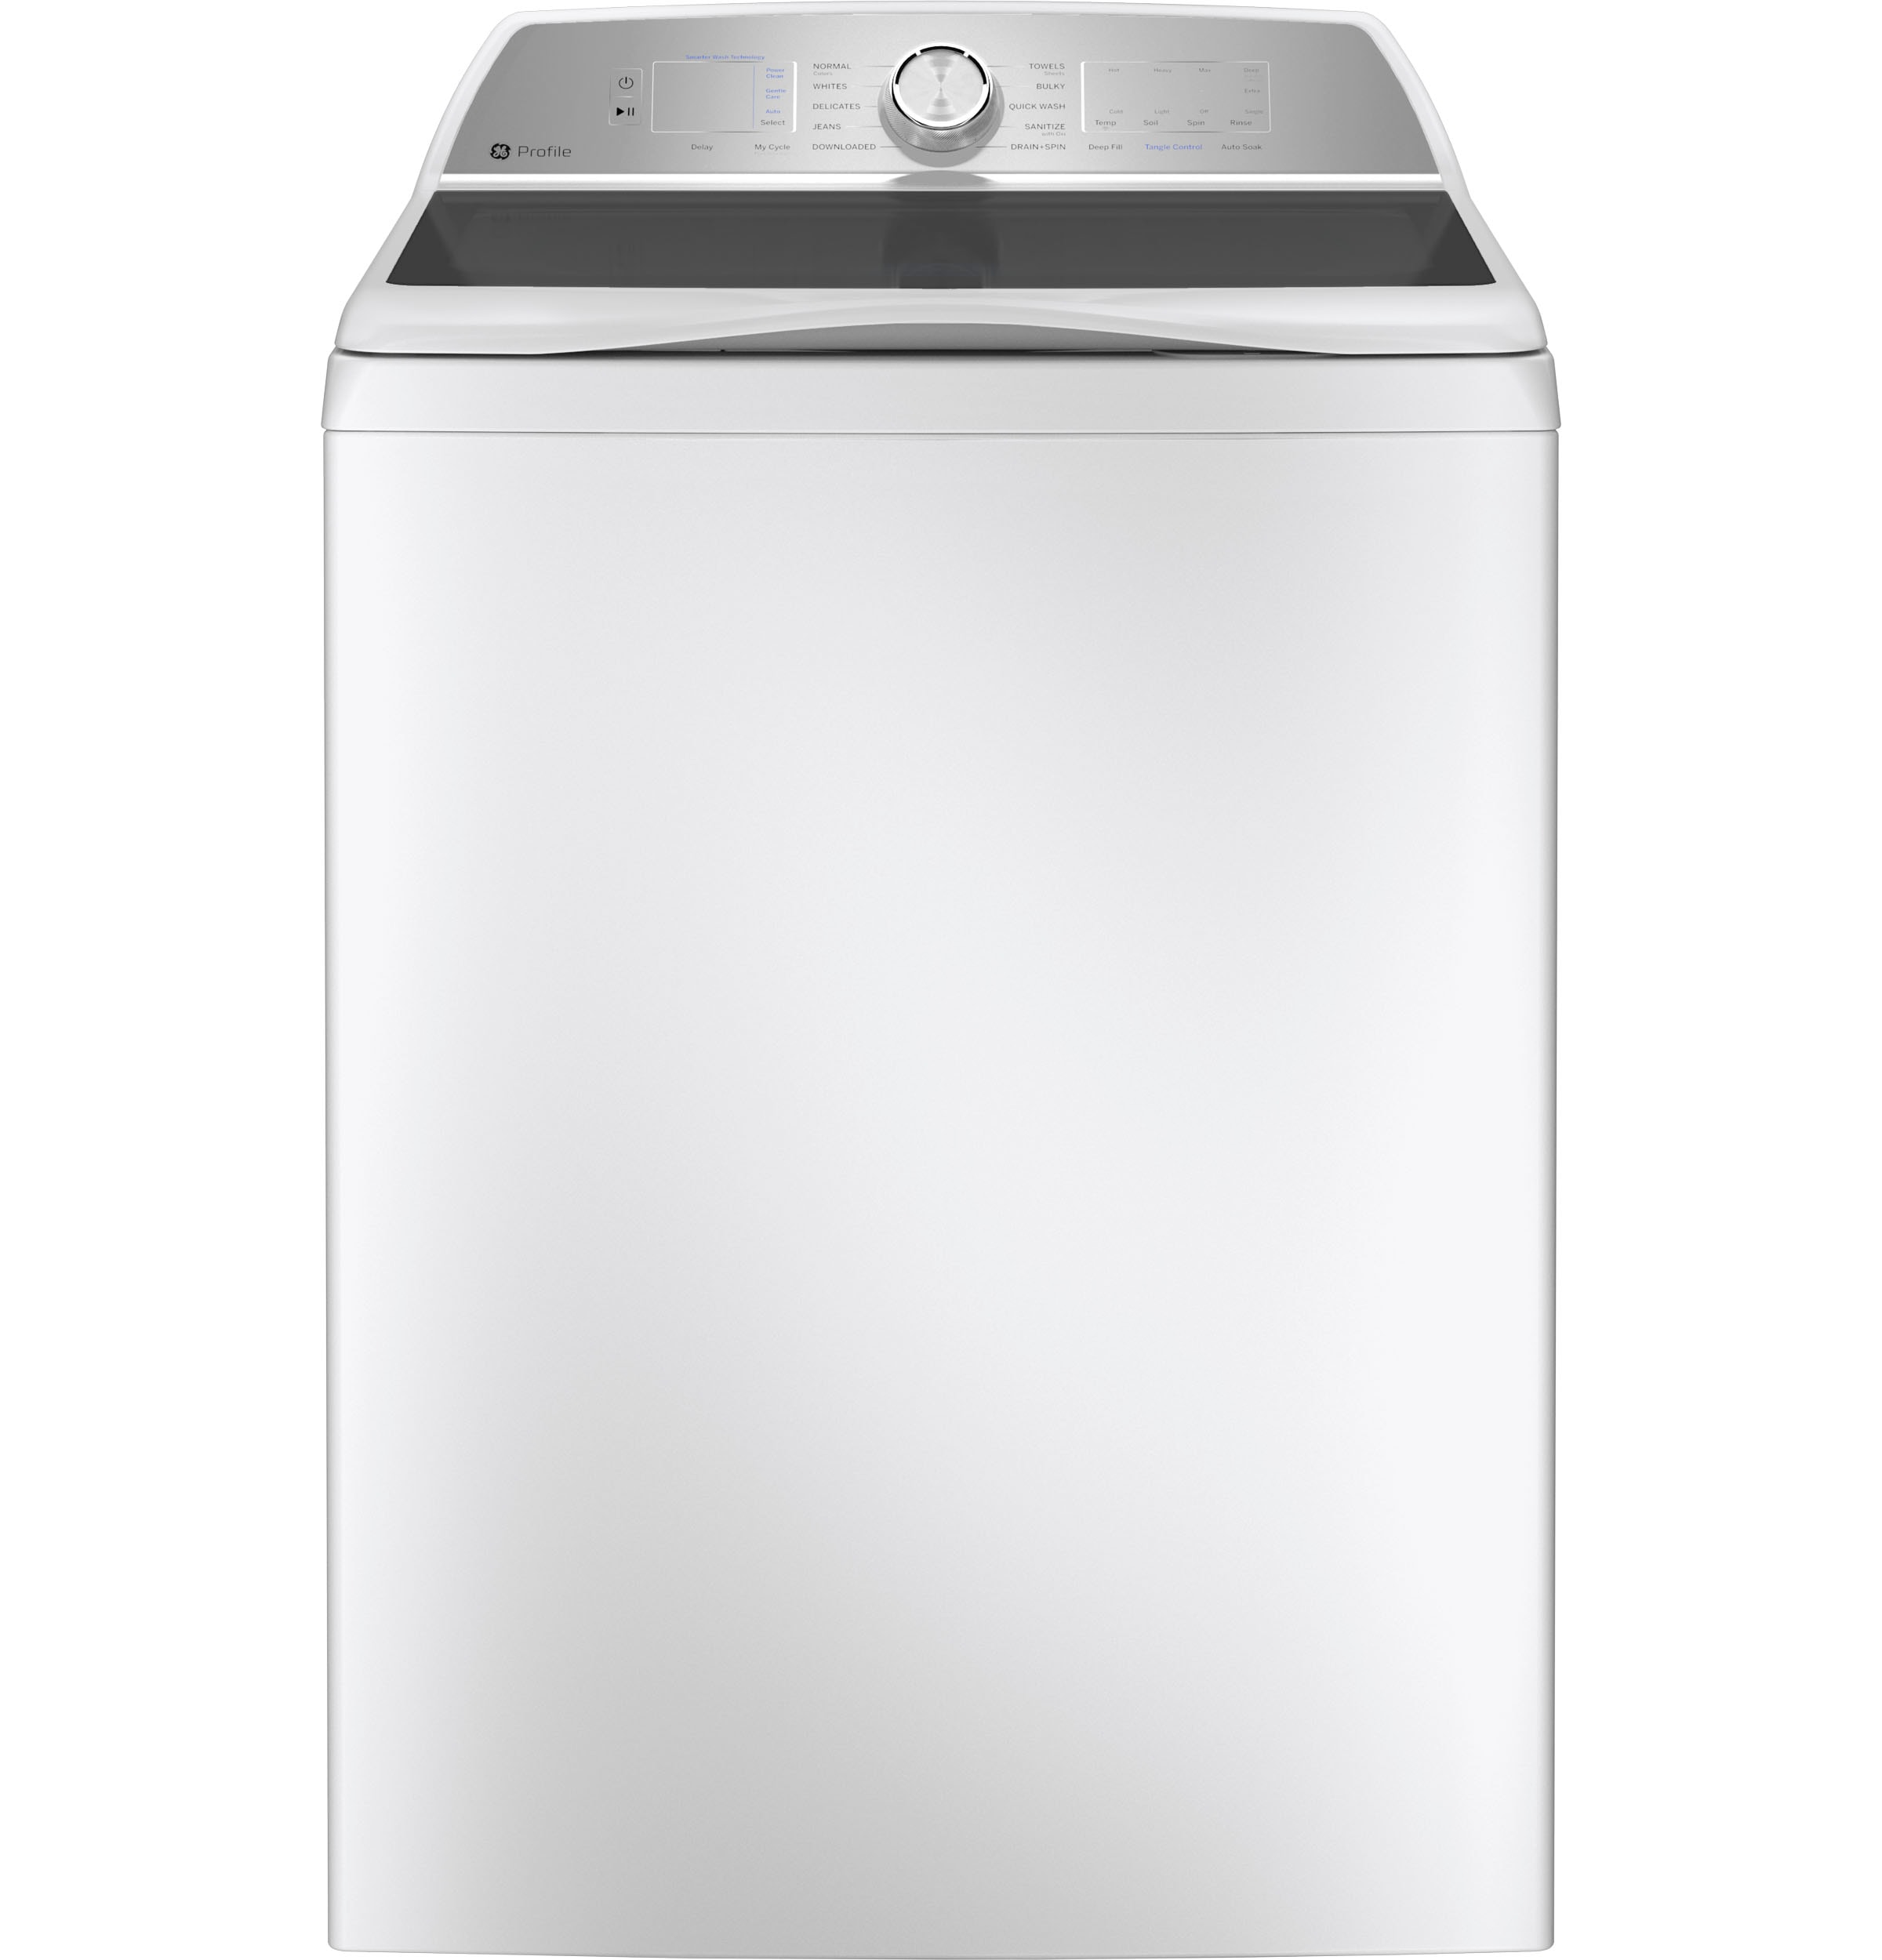 GE Profile 4.9-cu ft High Efficiency Agitator Washer ENERGY STAR in the Top-Load department at Lowes.com